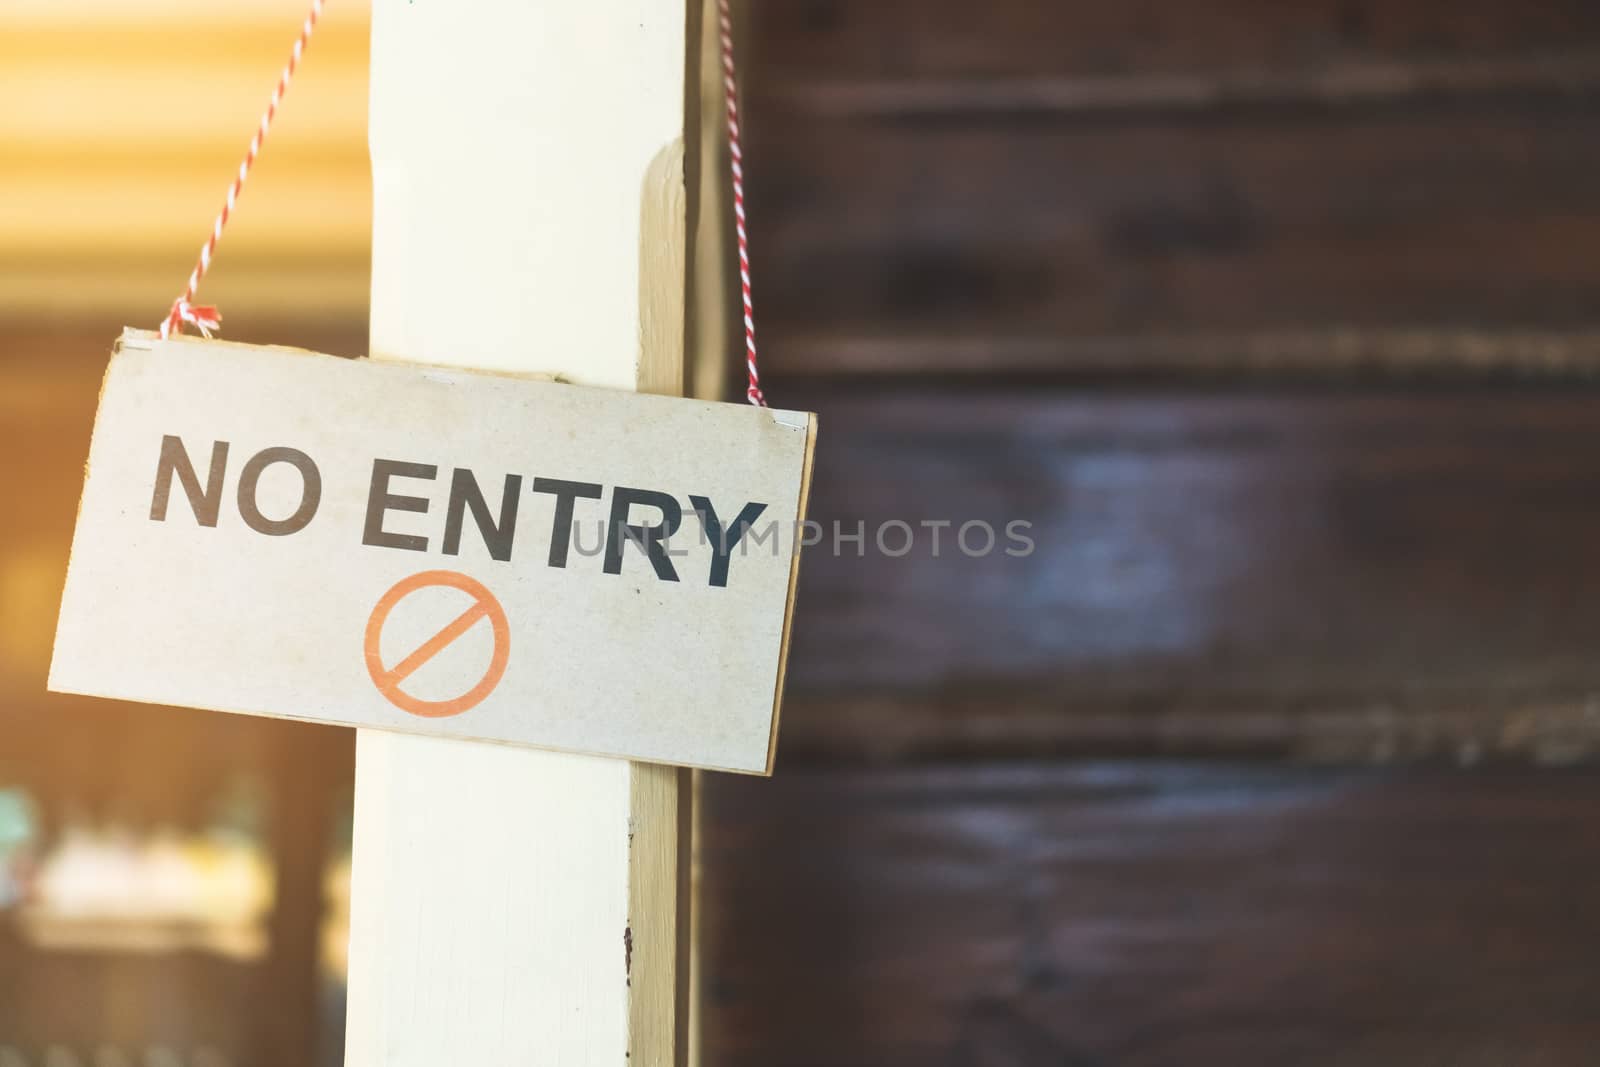 No entry sigh hanging on stair background.